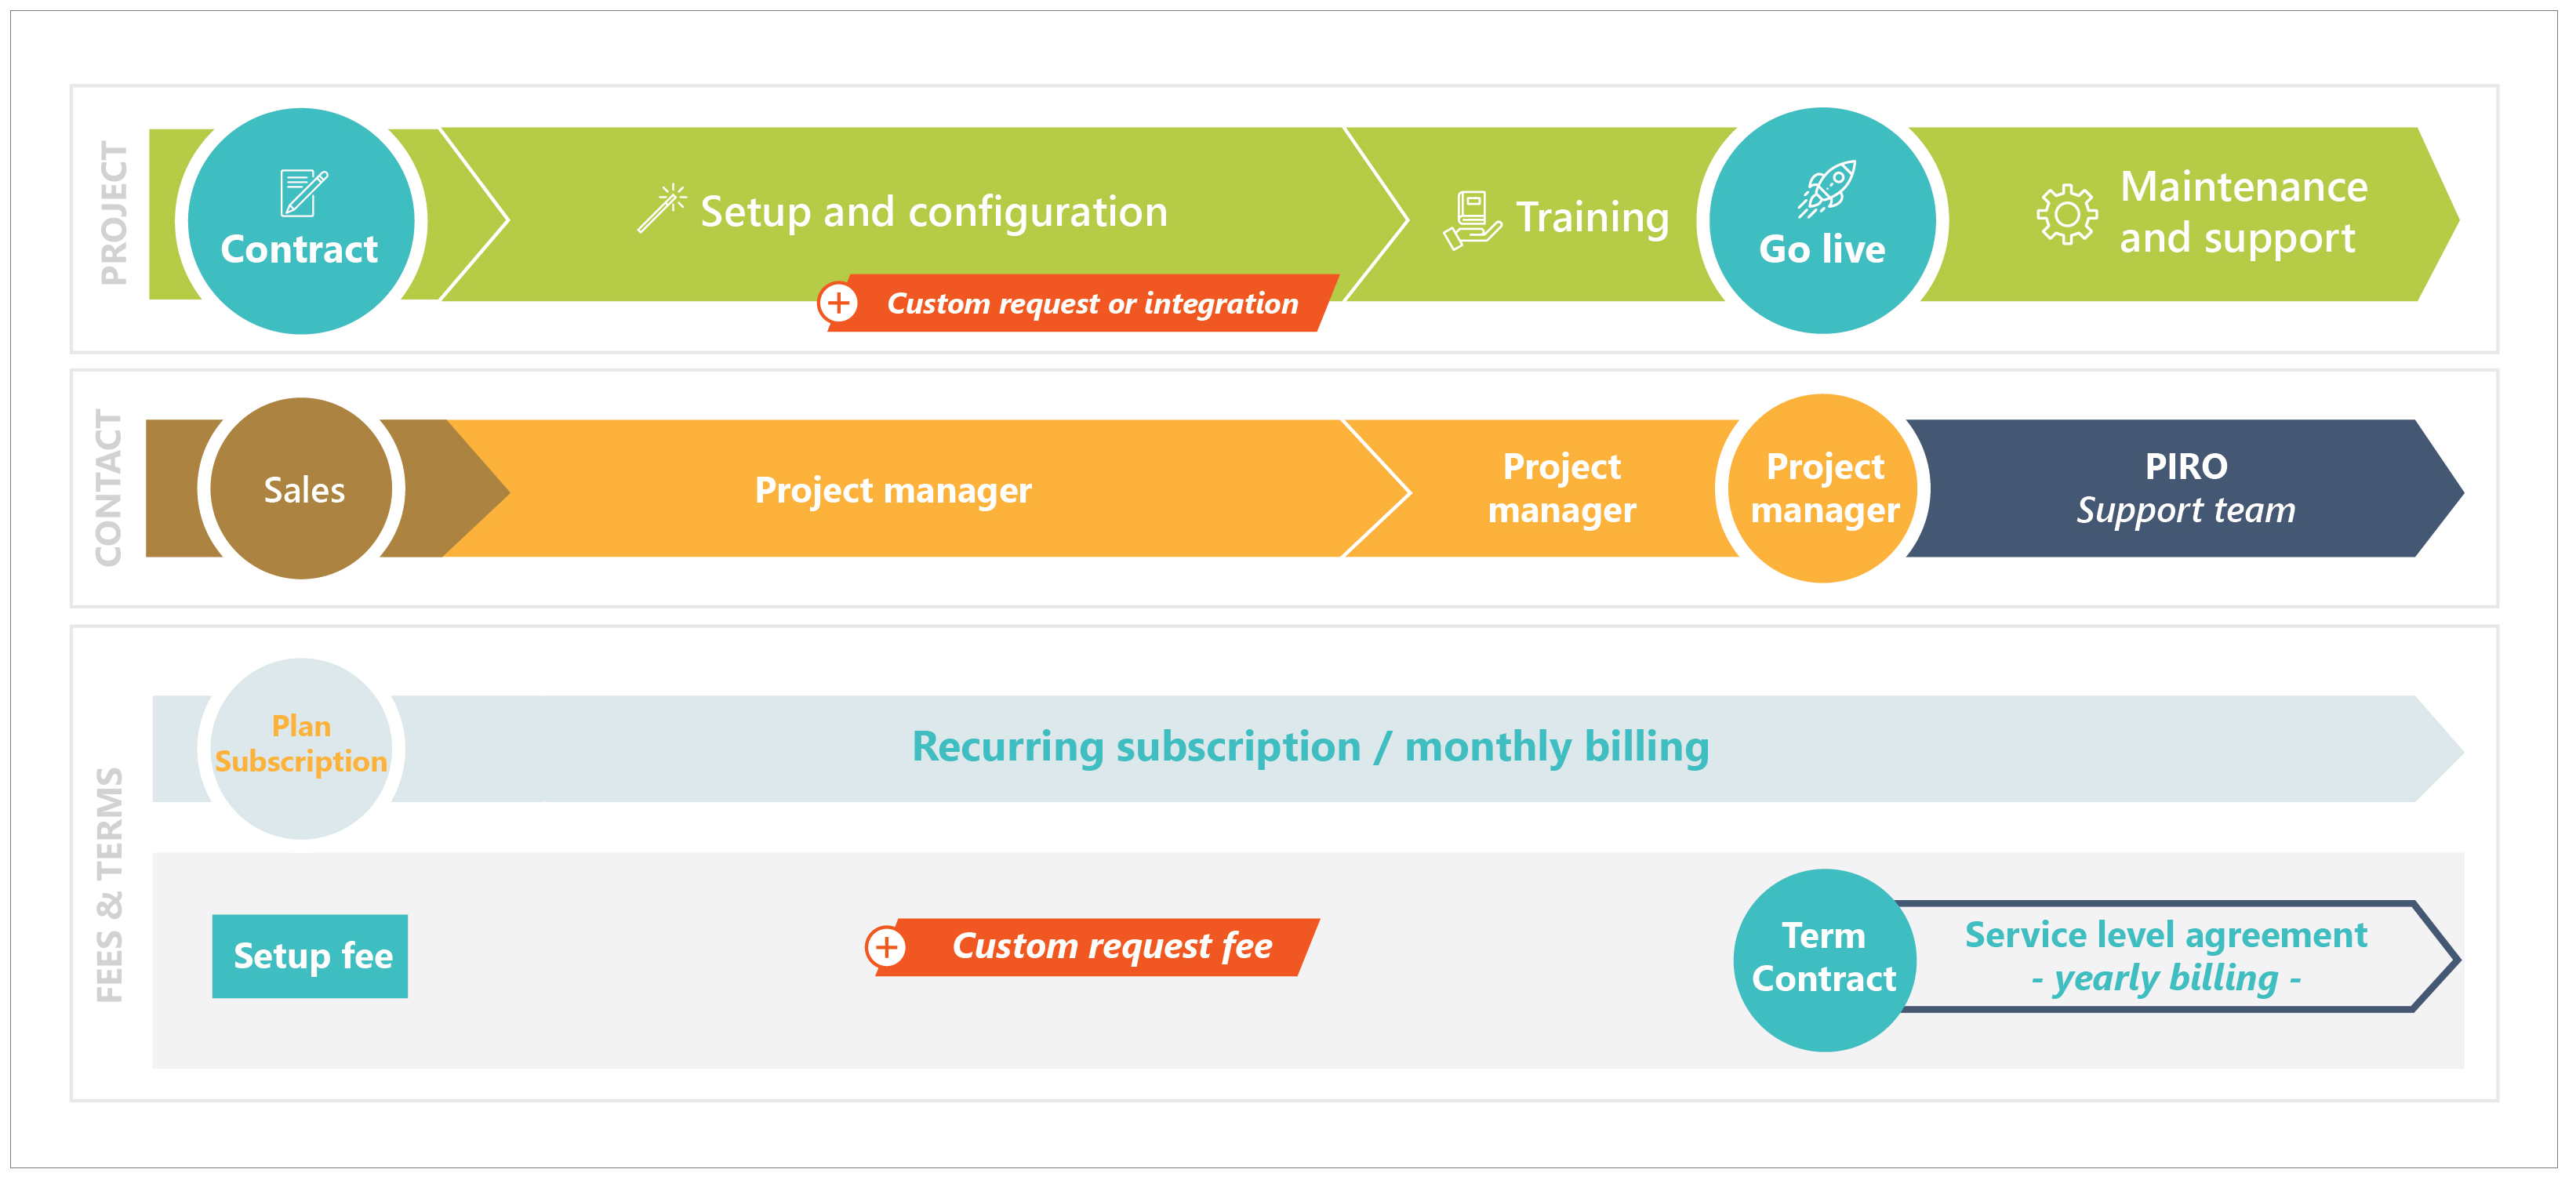 PIRO implementation phases